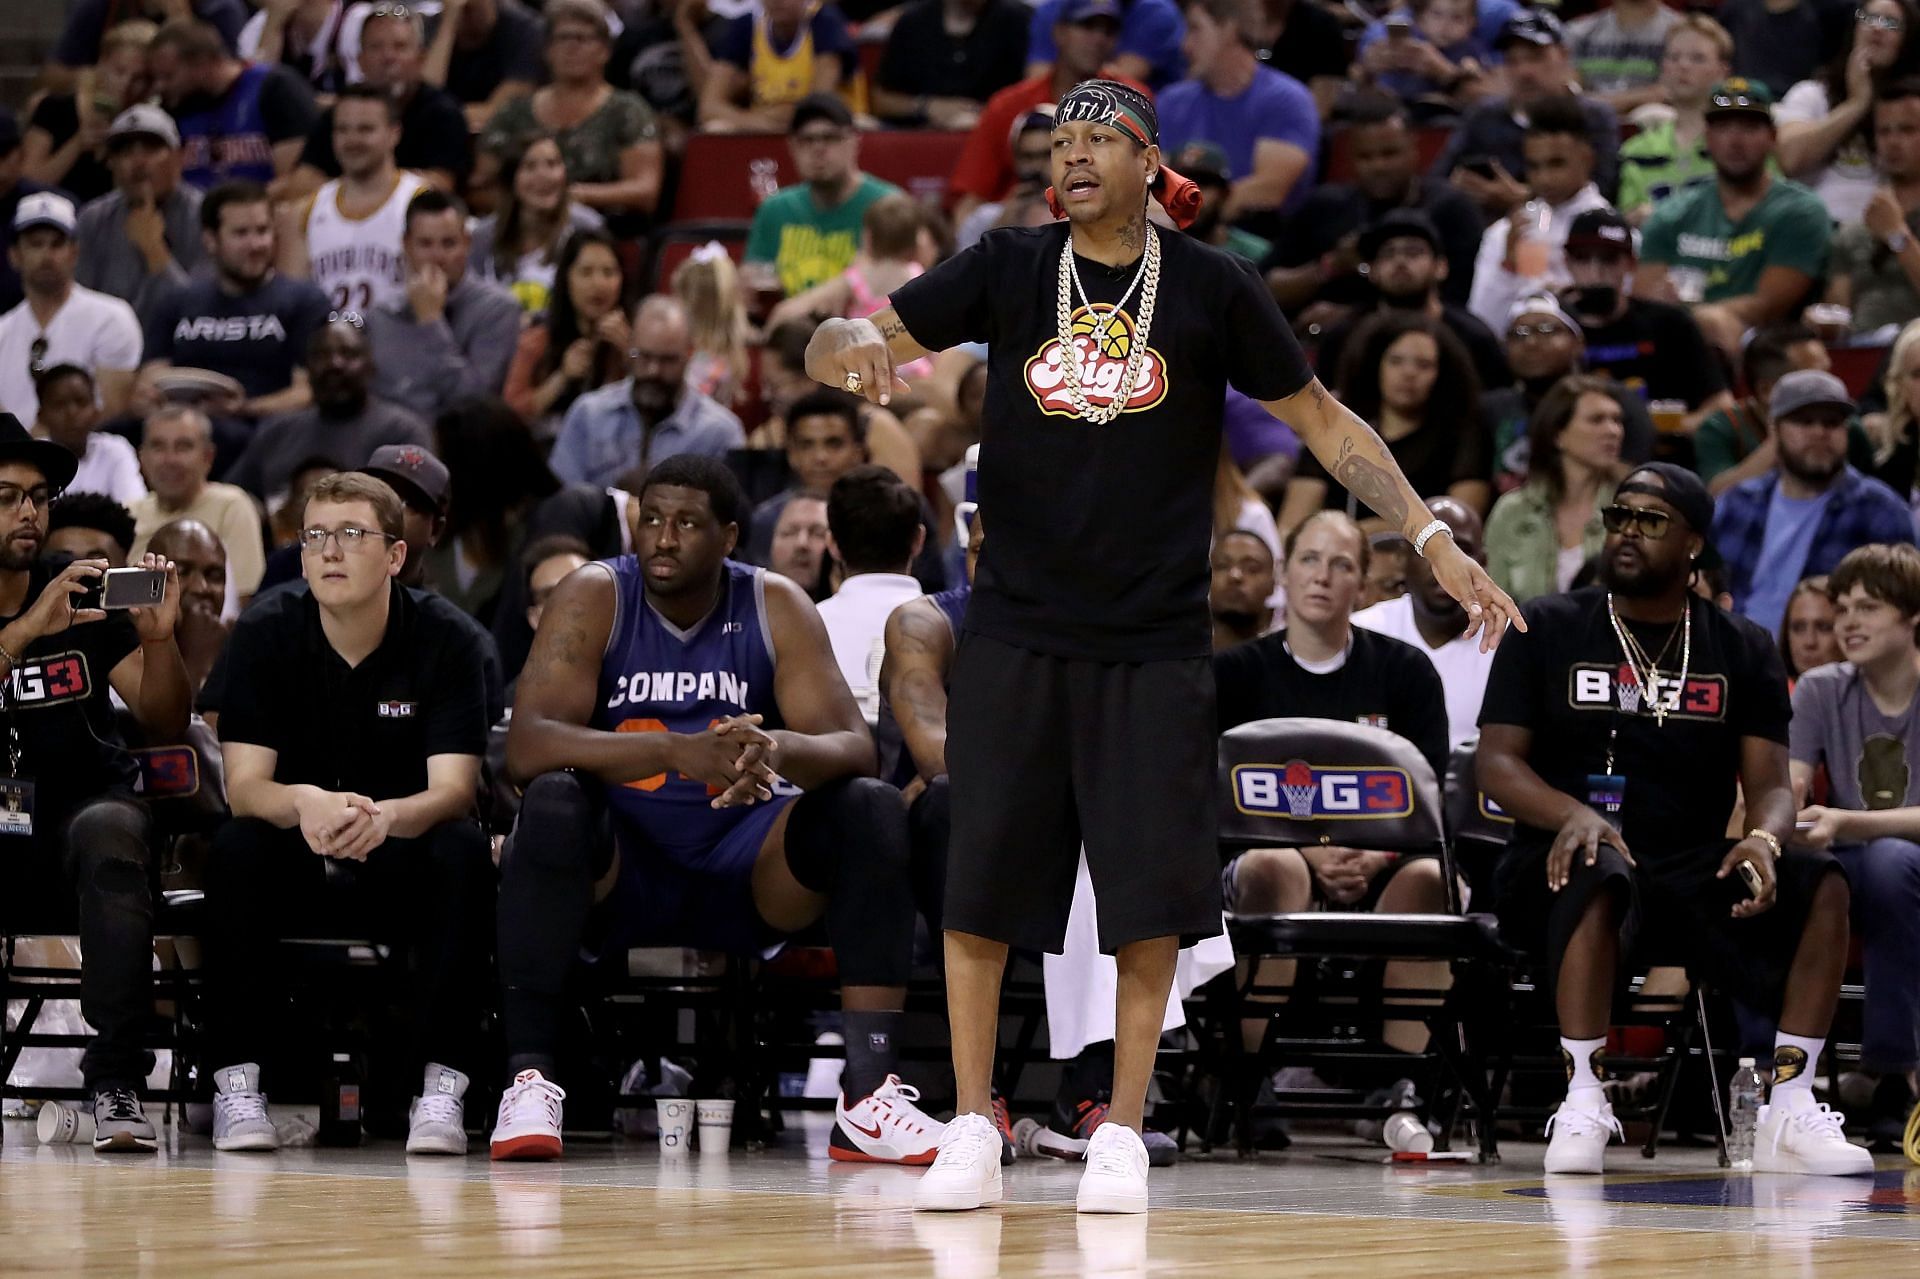 Allen &quot;The Answer&quot; Iverson of the 3&#039;s Company reacts during the game against the Tri-State from the bench in week nine of the BIG3 three-on-three basketball league at KeyArena on August 20, 2017 in Seattle, Washington.